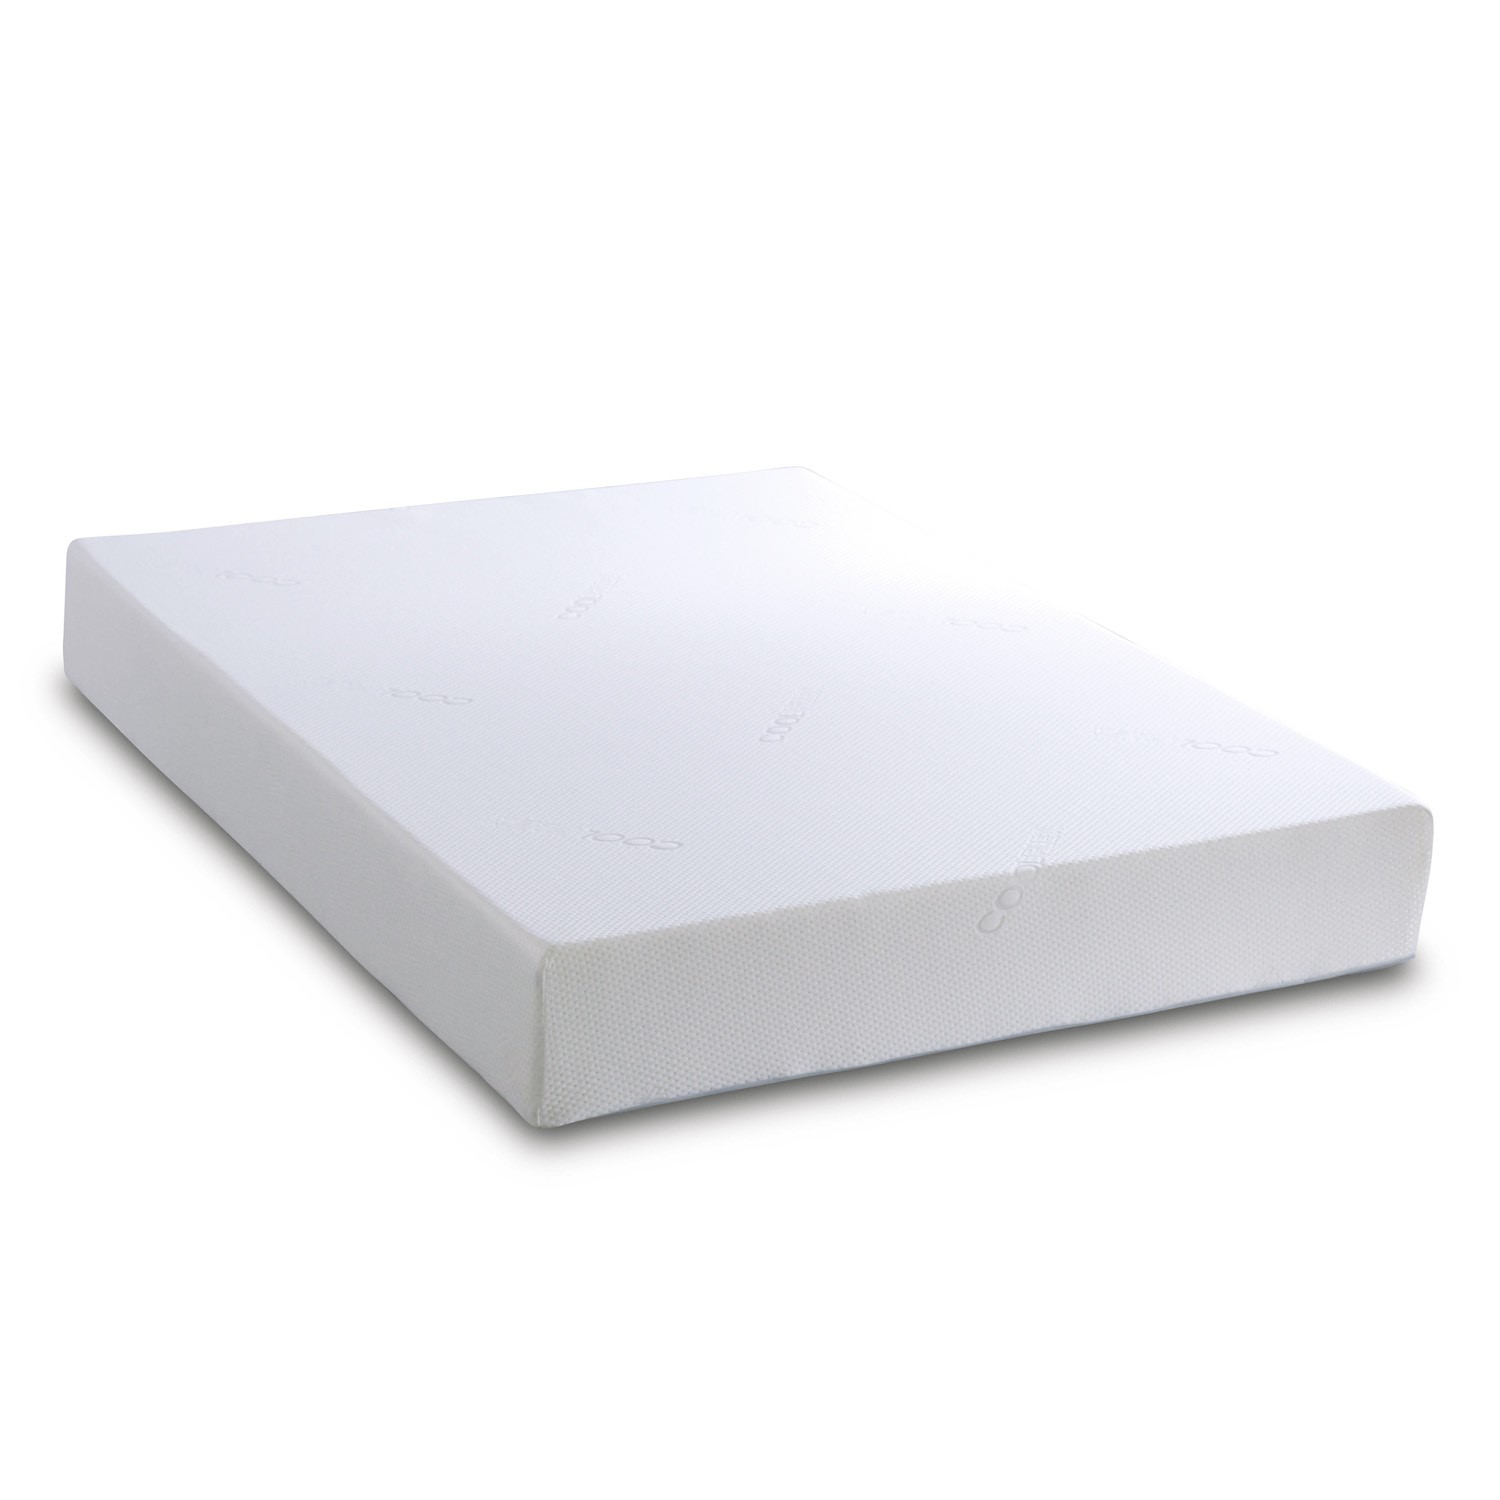 Read more about Single memory foam orthopaedic rolled mattress with removable cover visco therapy